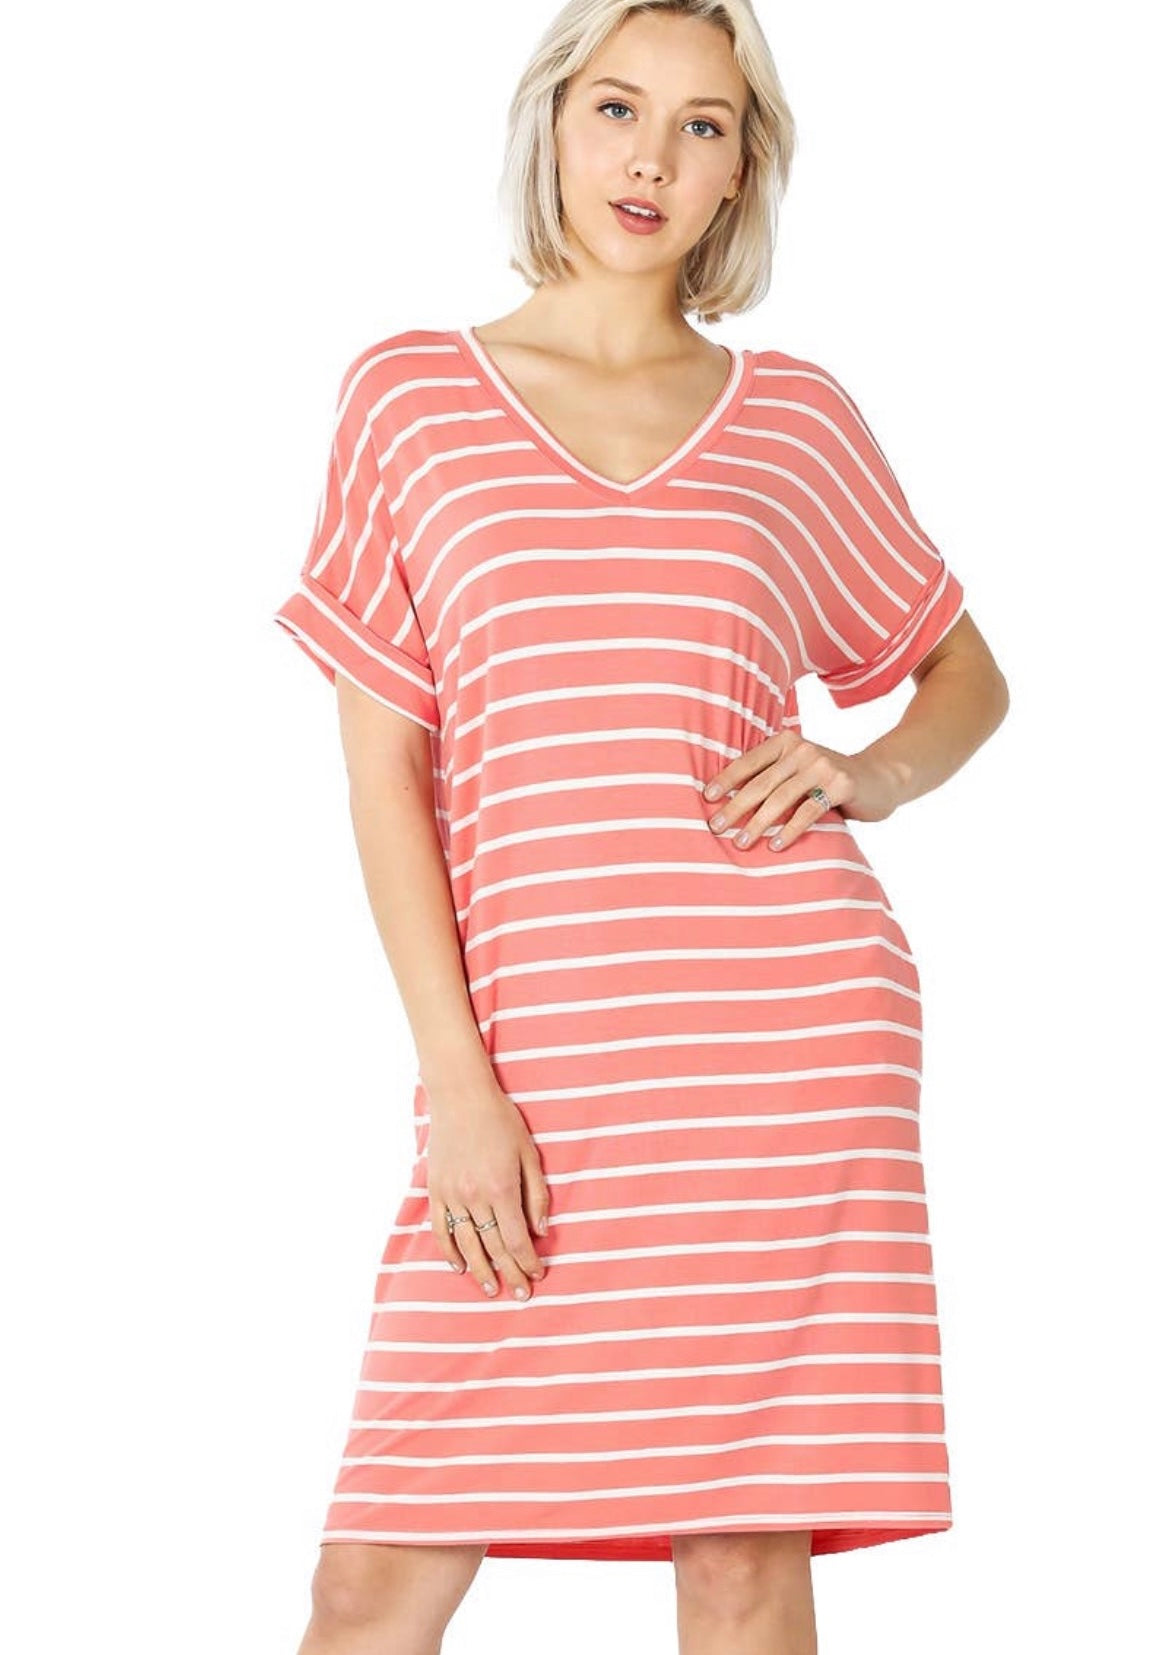 Out of Line Dress Coral and White